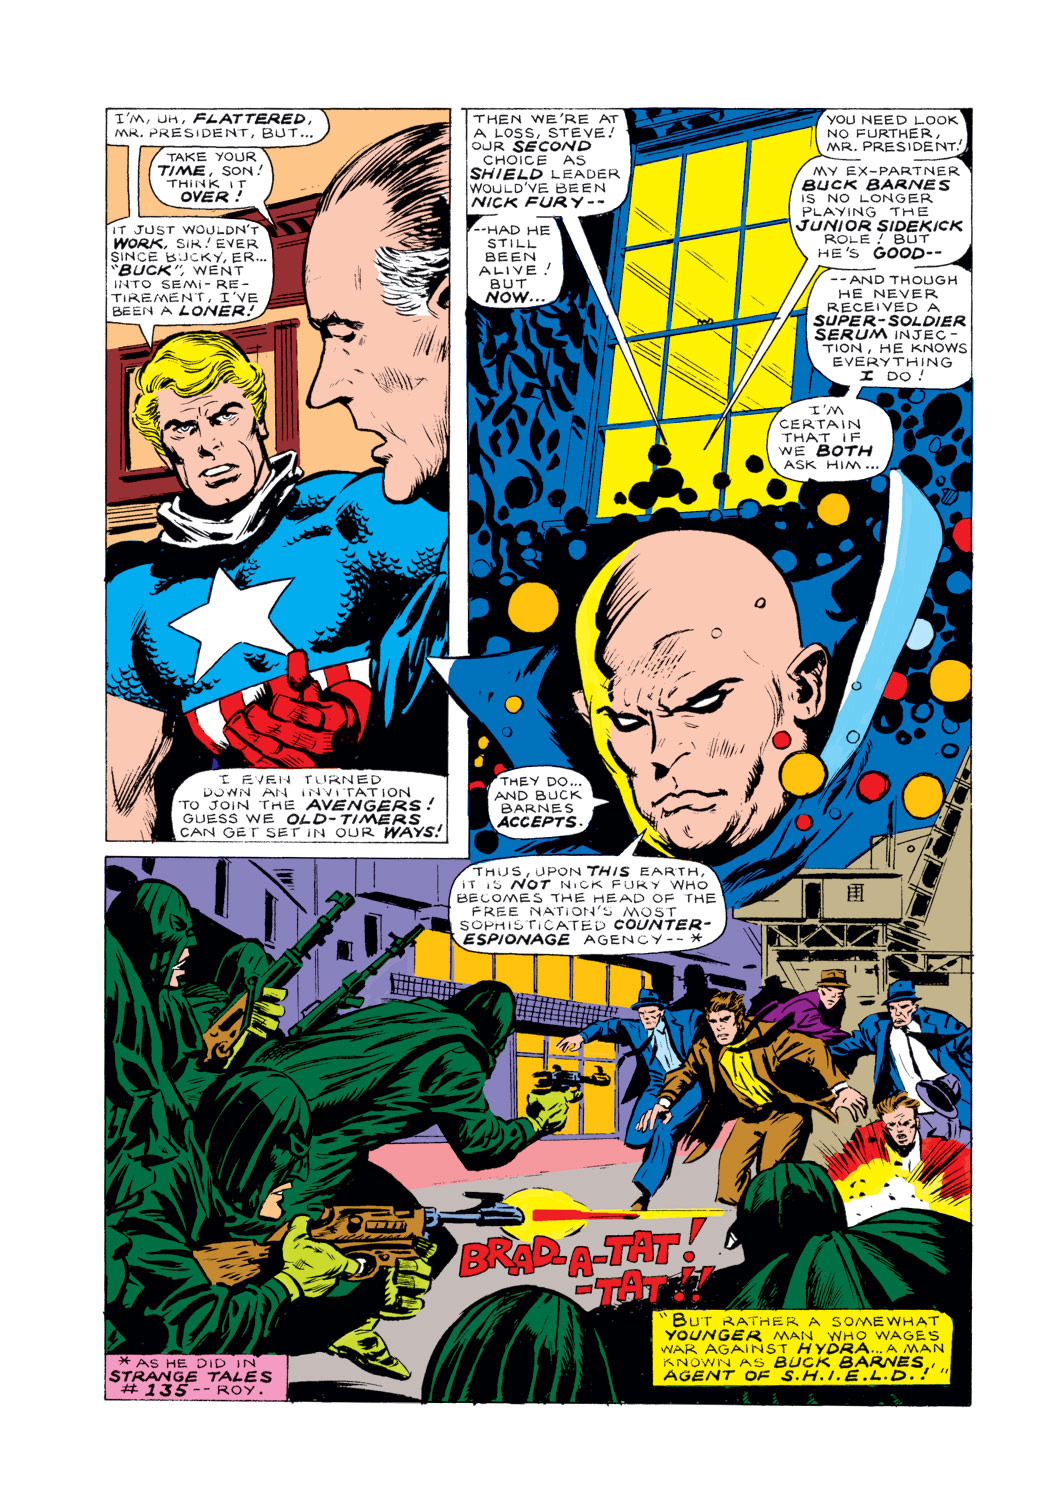 What If? (1977) Issue #5 - Captain America hadn't vanished during World War Two #5 - English 14